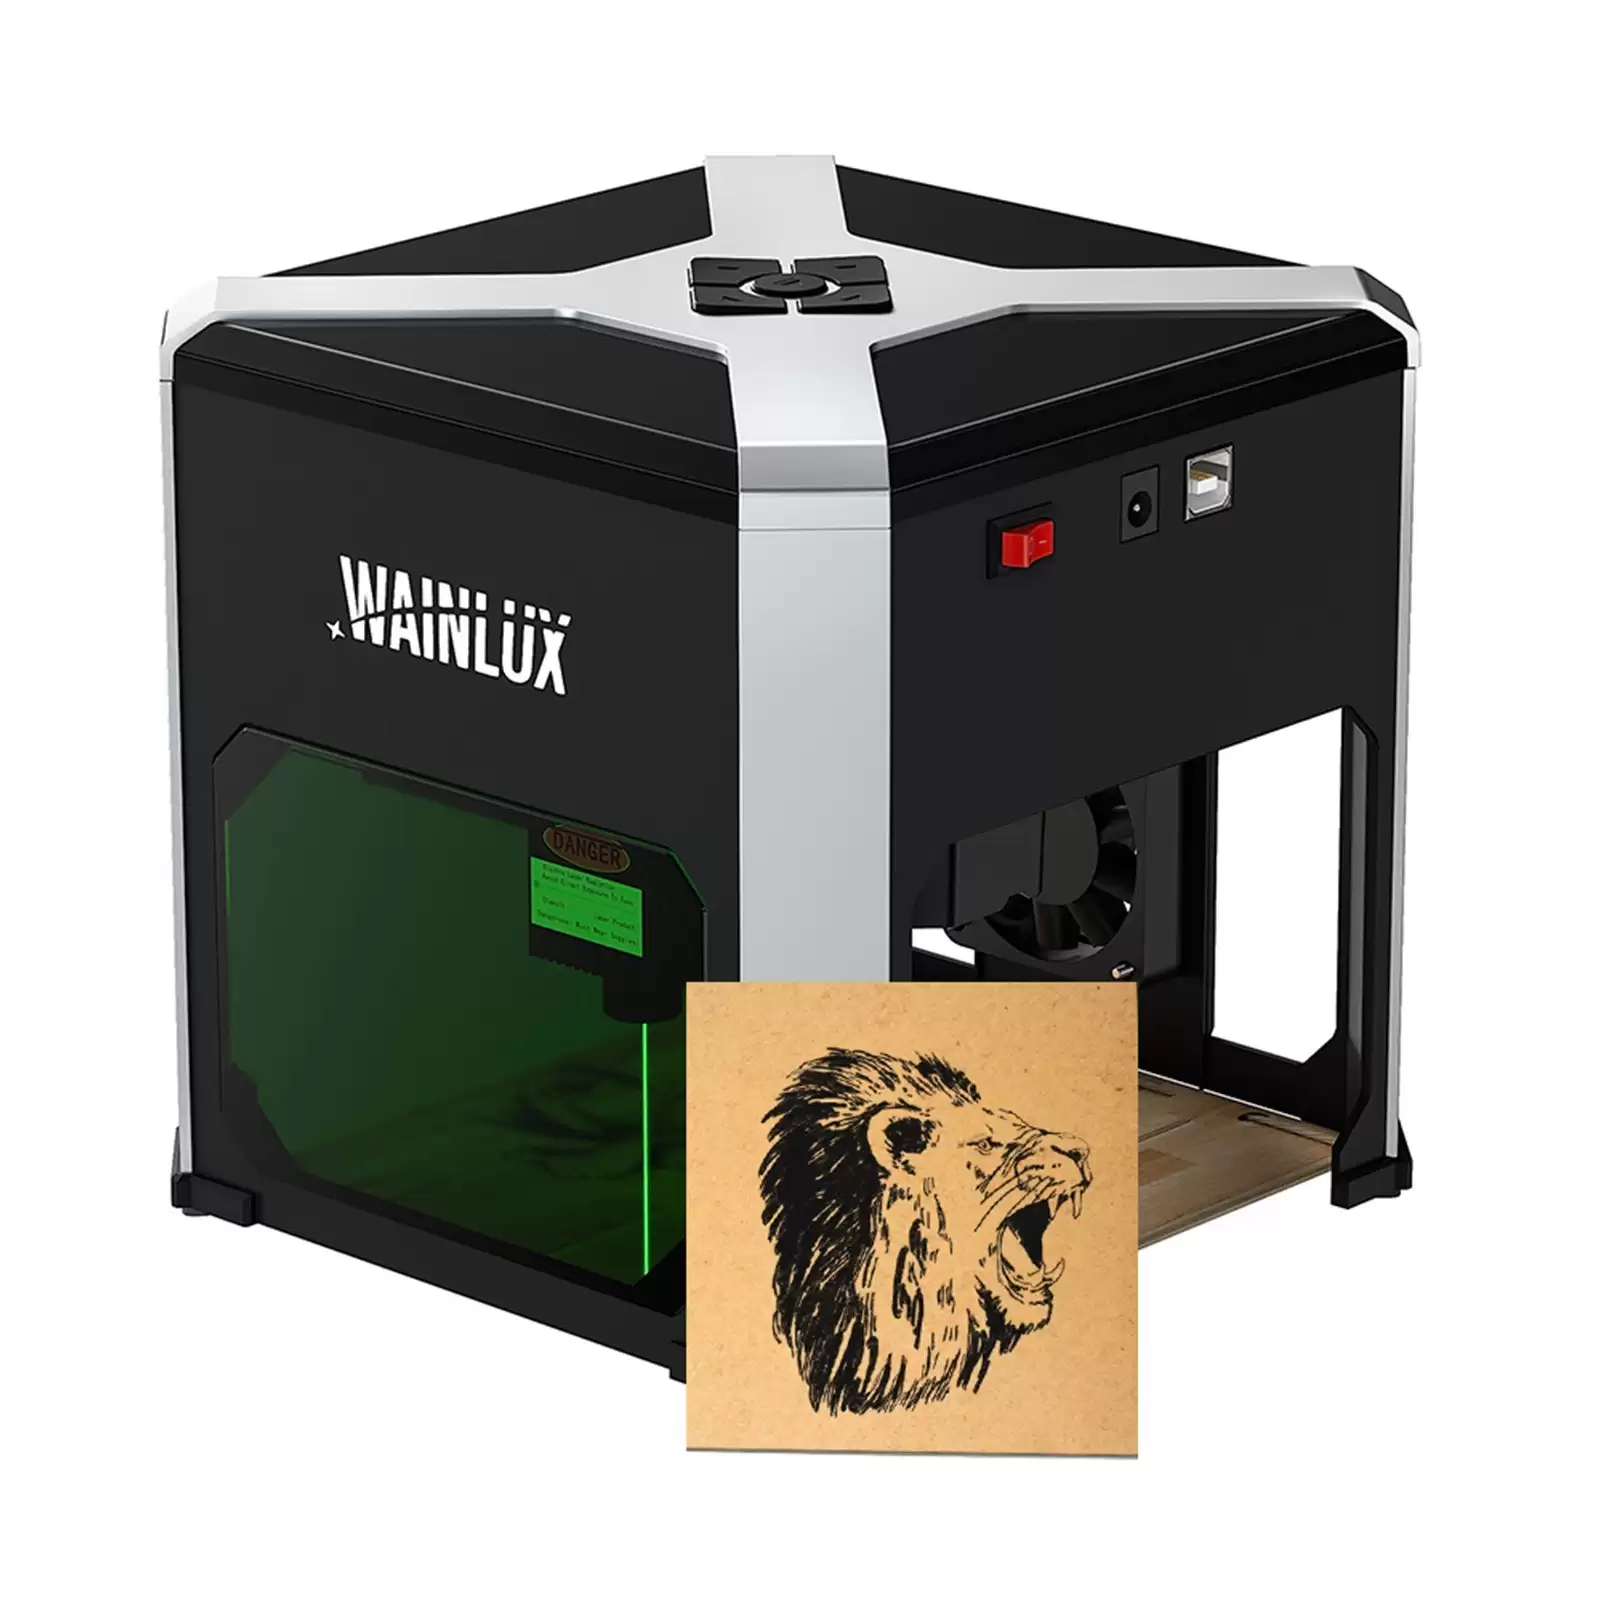 Order In Just $141.99 Wainlux K6 Portable Laser Engraver Cutting Engraving Household Marking Machine With This Tomtop Coupon